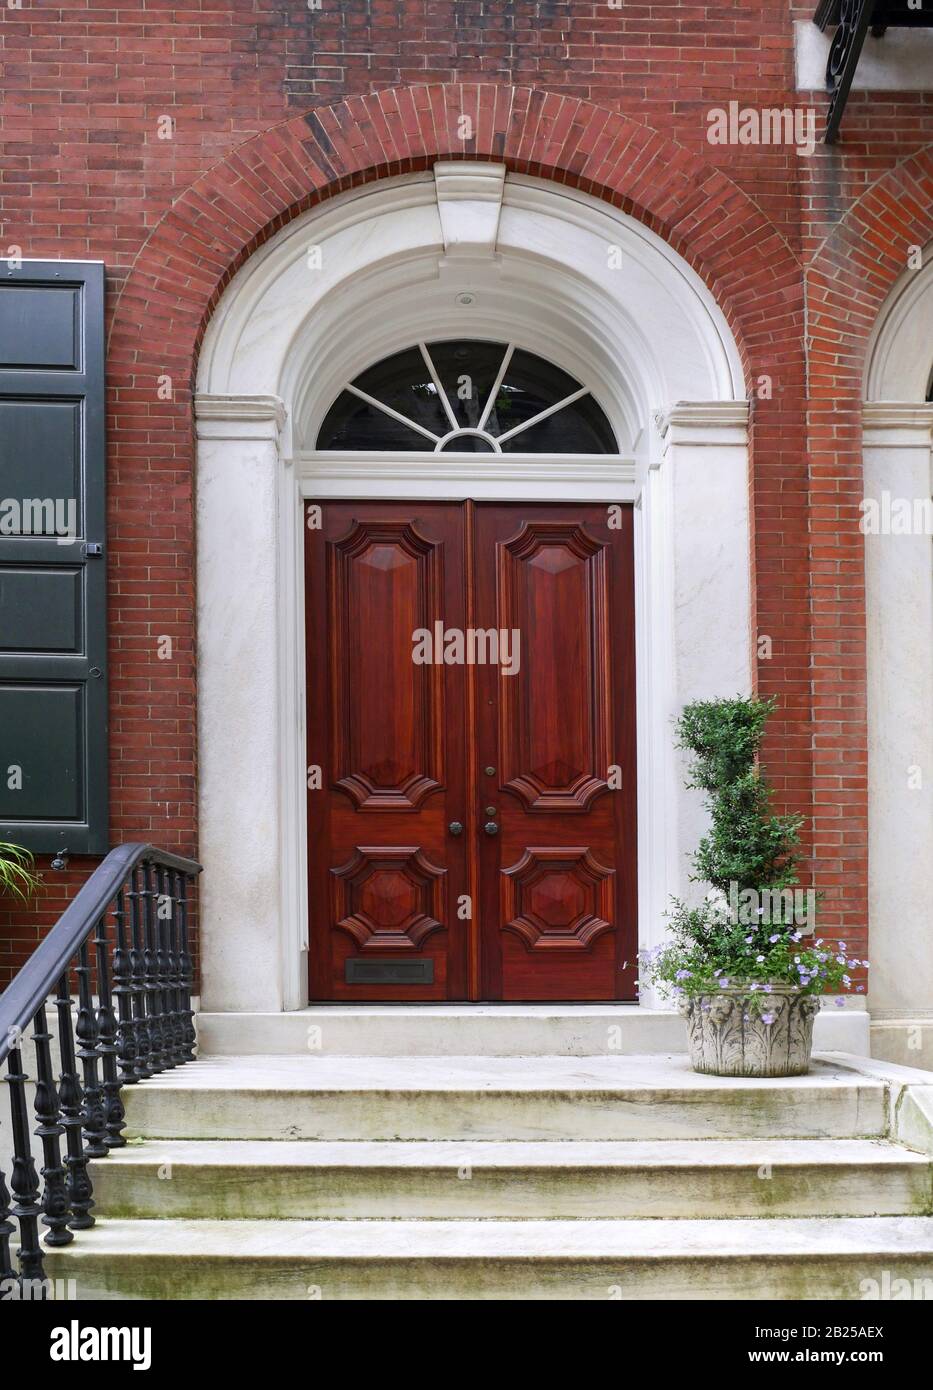 elegant wooden front door of old townhouse or apartment building Stock Photo